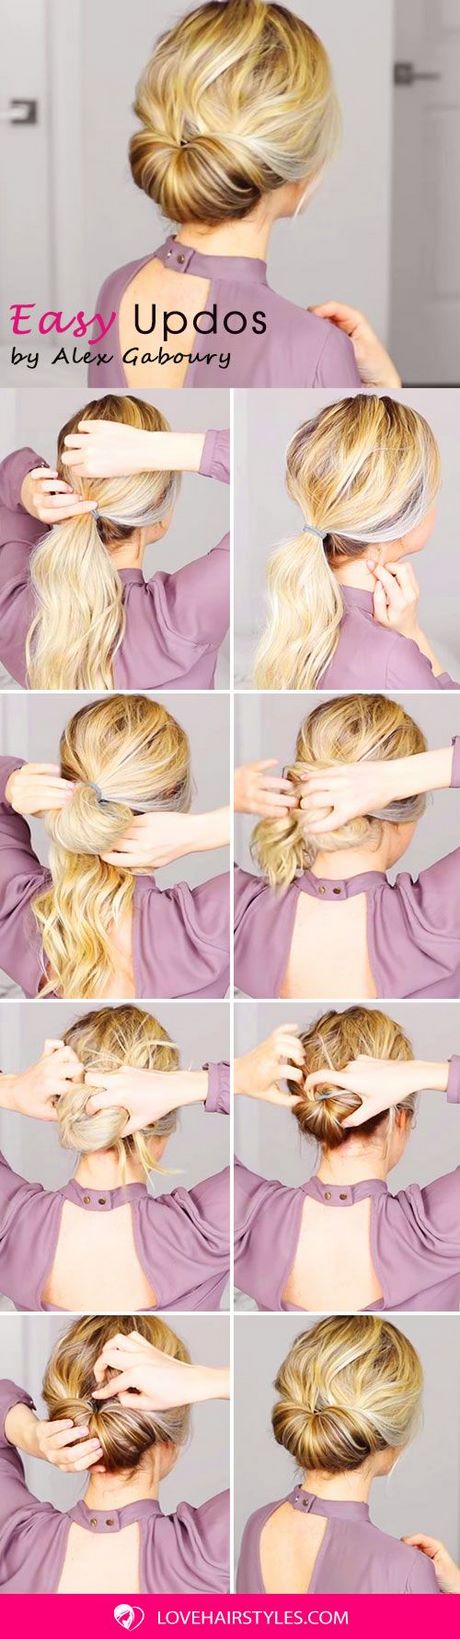 Simple up hairstyles for long hair simple-up-hairstyles-for-long-hair-69_18